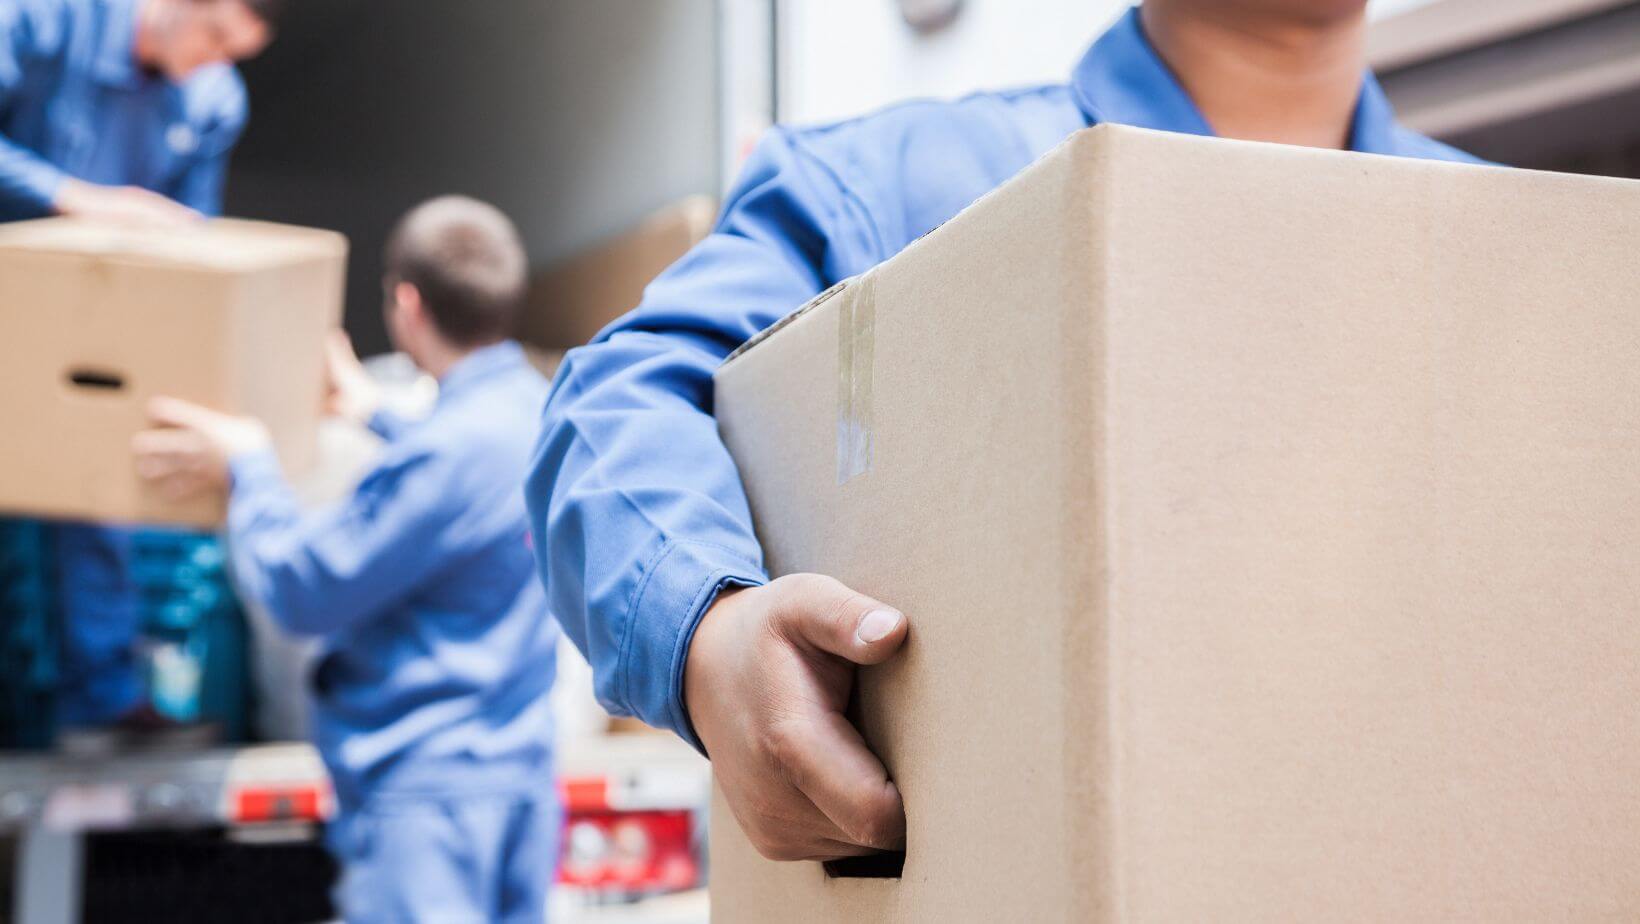 Professional movers transporting furniture and boxes in a residential area.